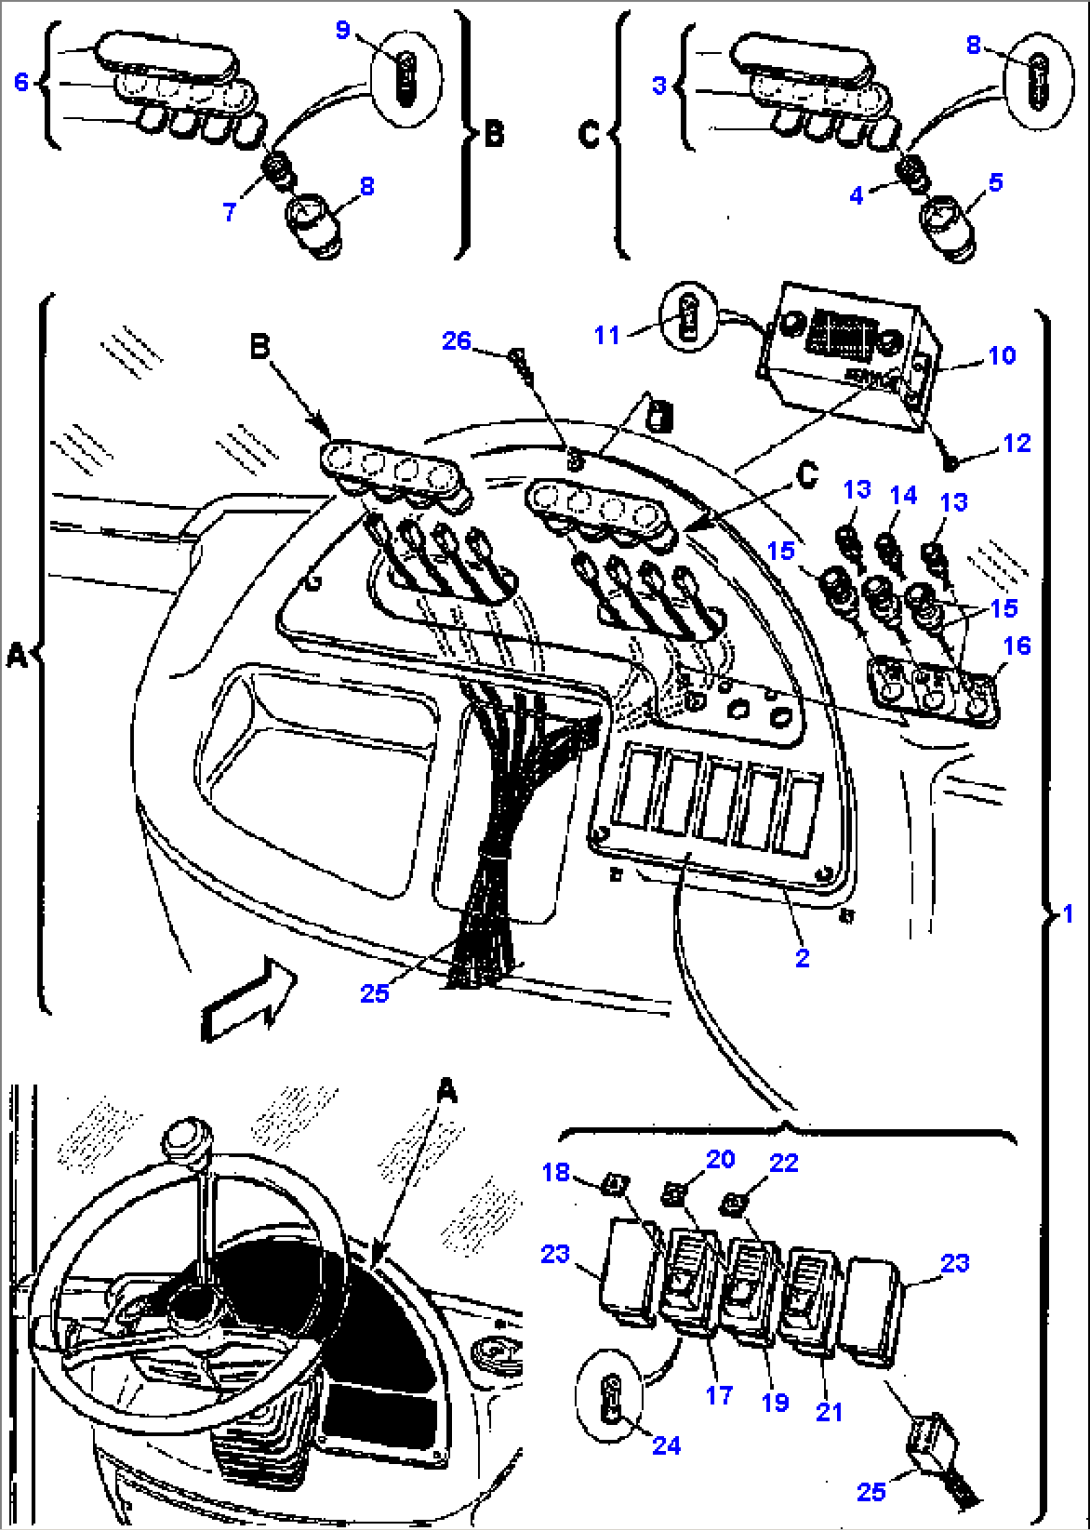 FIG. E1410-03A0 FRONT DASHBOARD